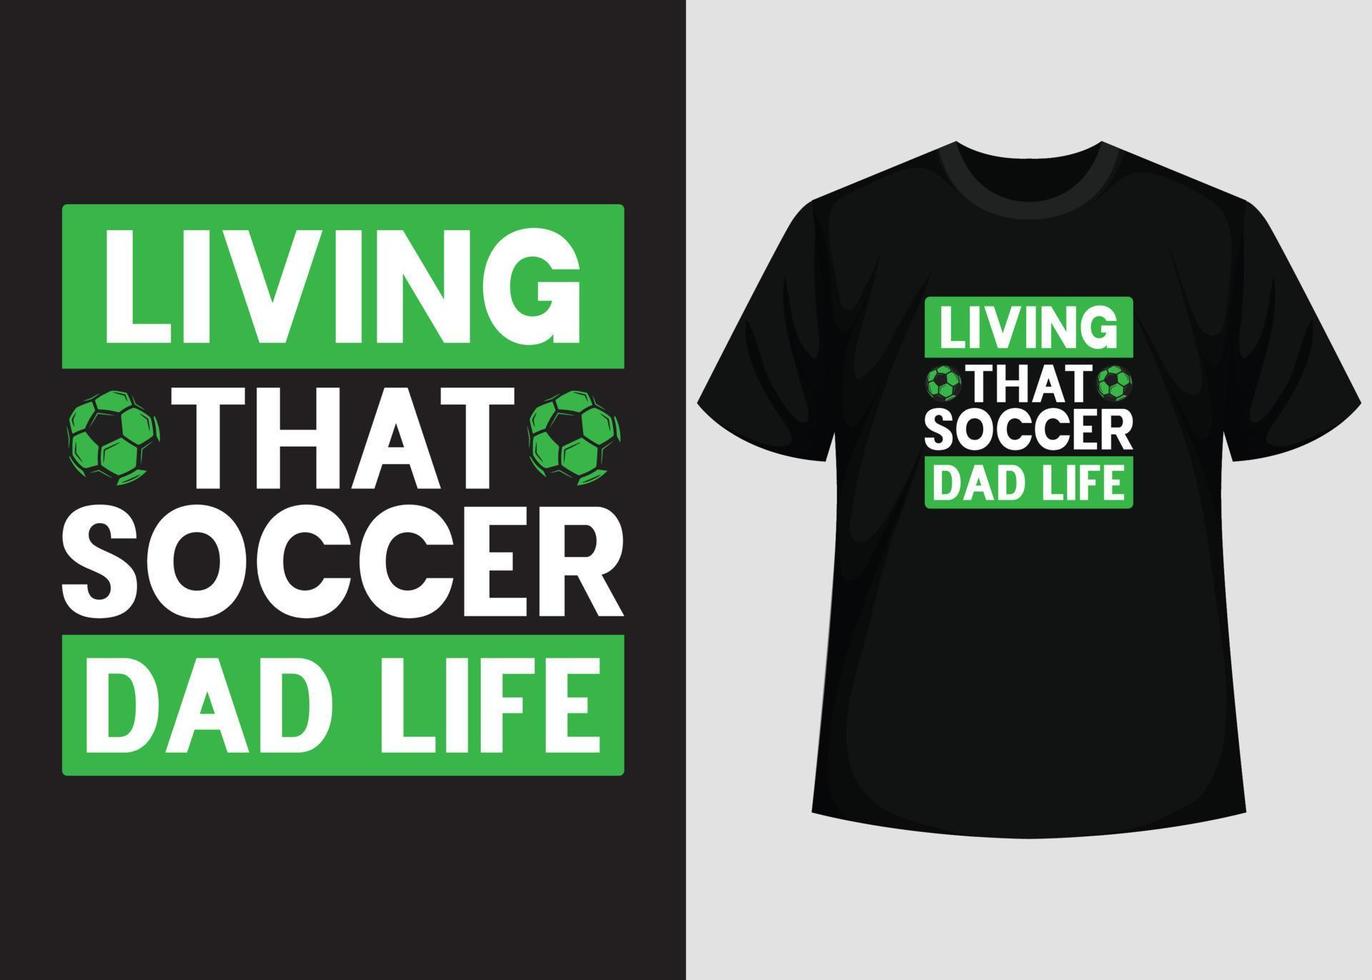 Living That Soccer Dad Life T shirt Design. Best Happy Football Day T Shirt Design. T-shirt Design, Typography T Shirt, Vector and Illustration Elements for a Printable Products.